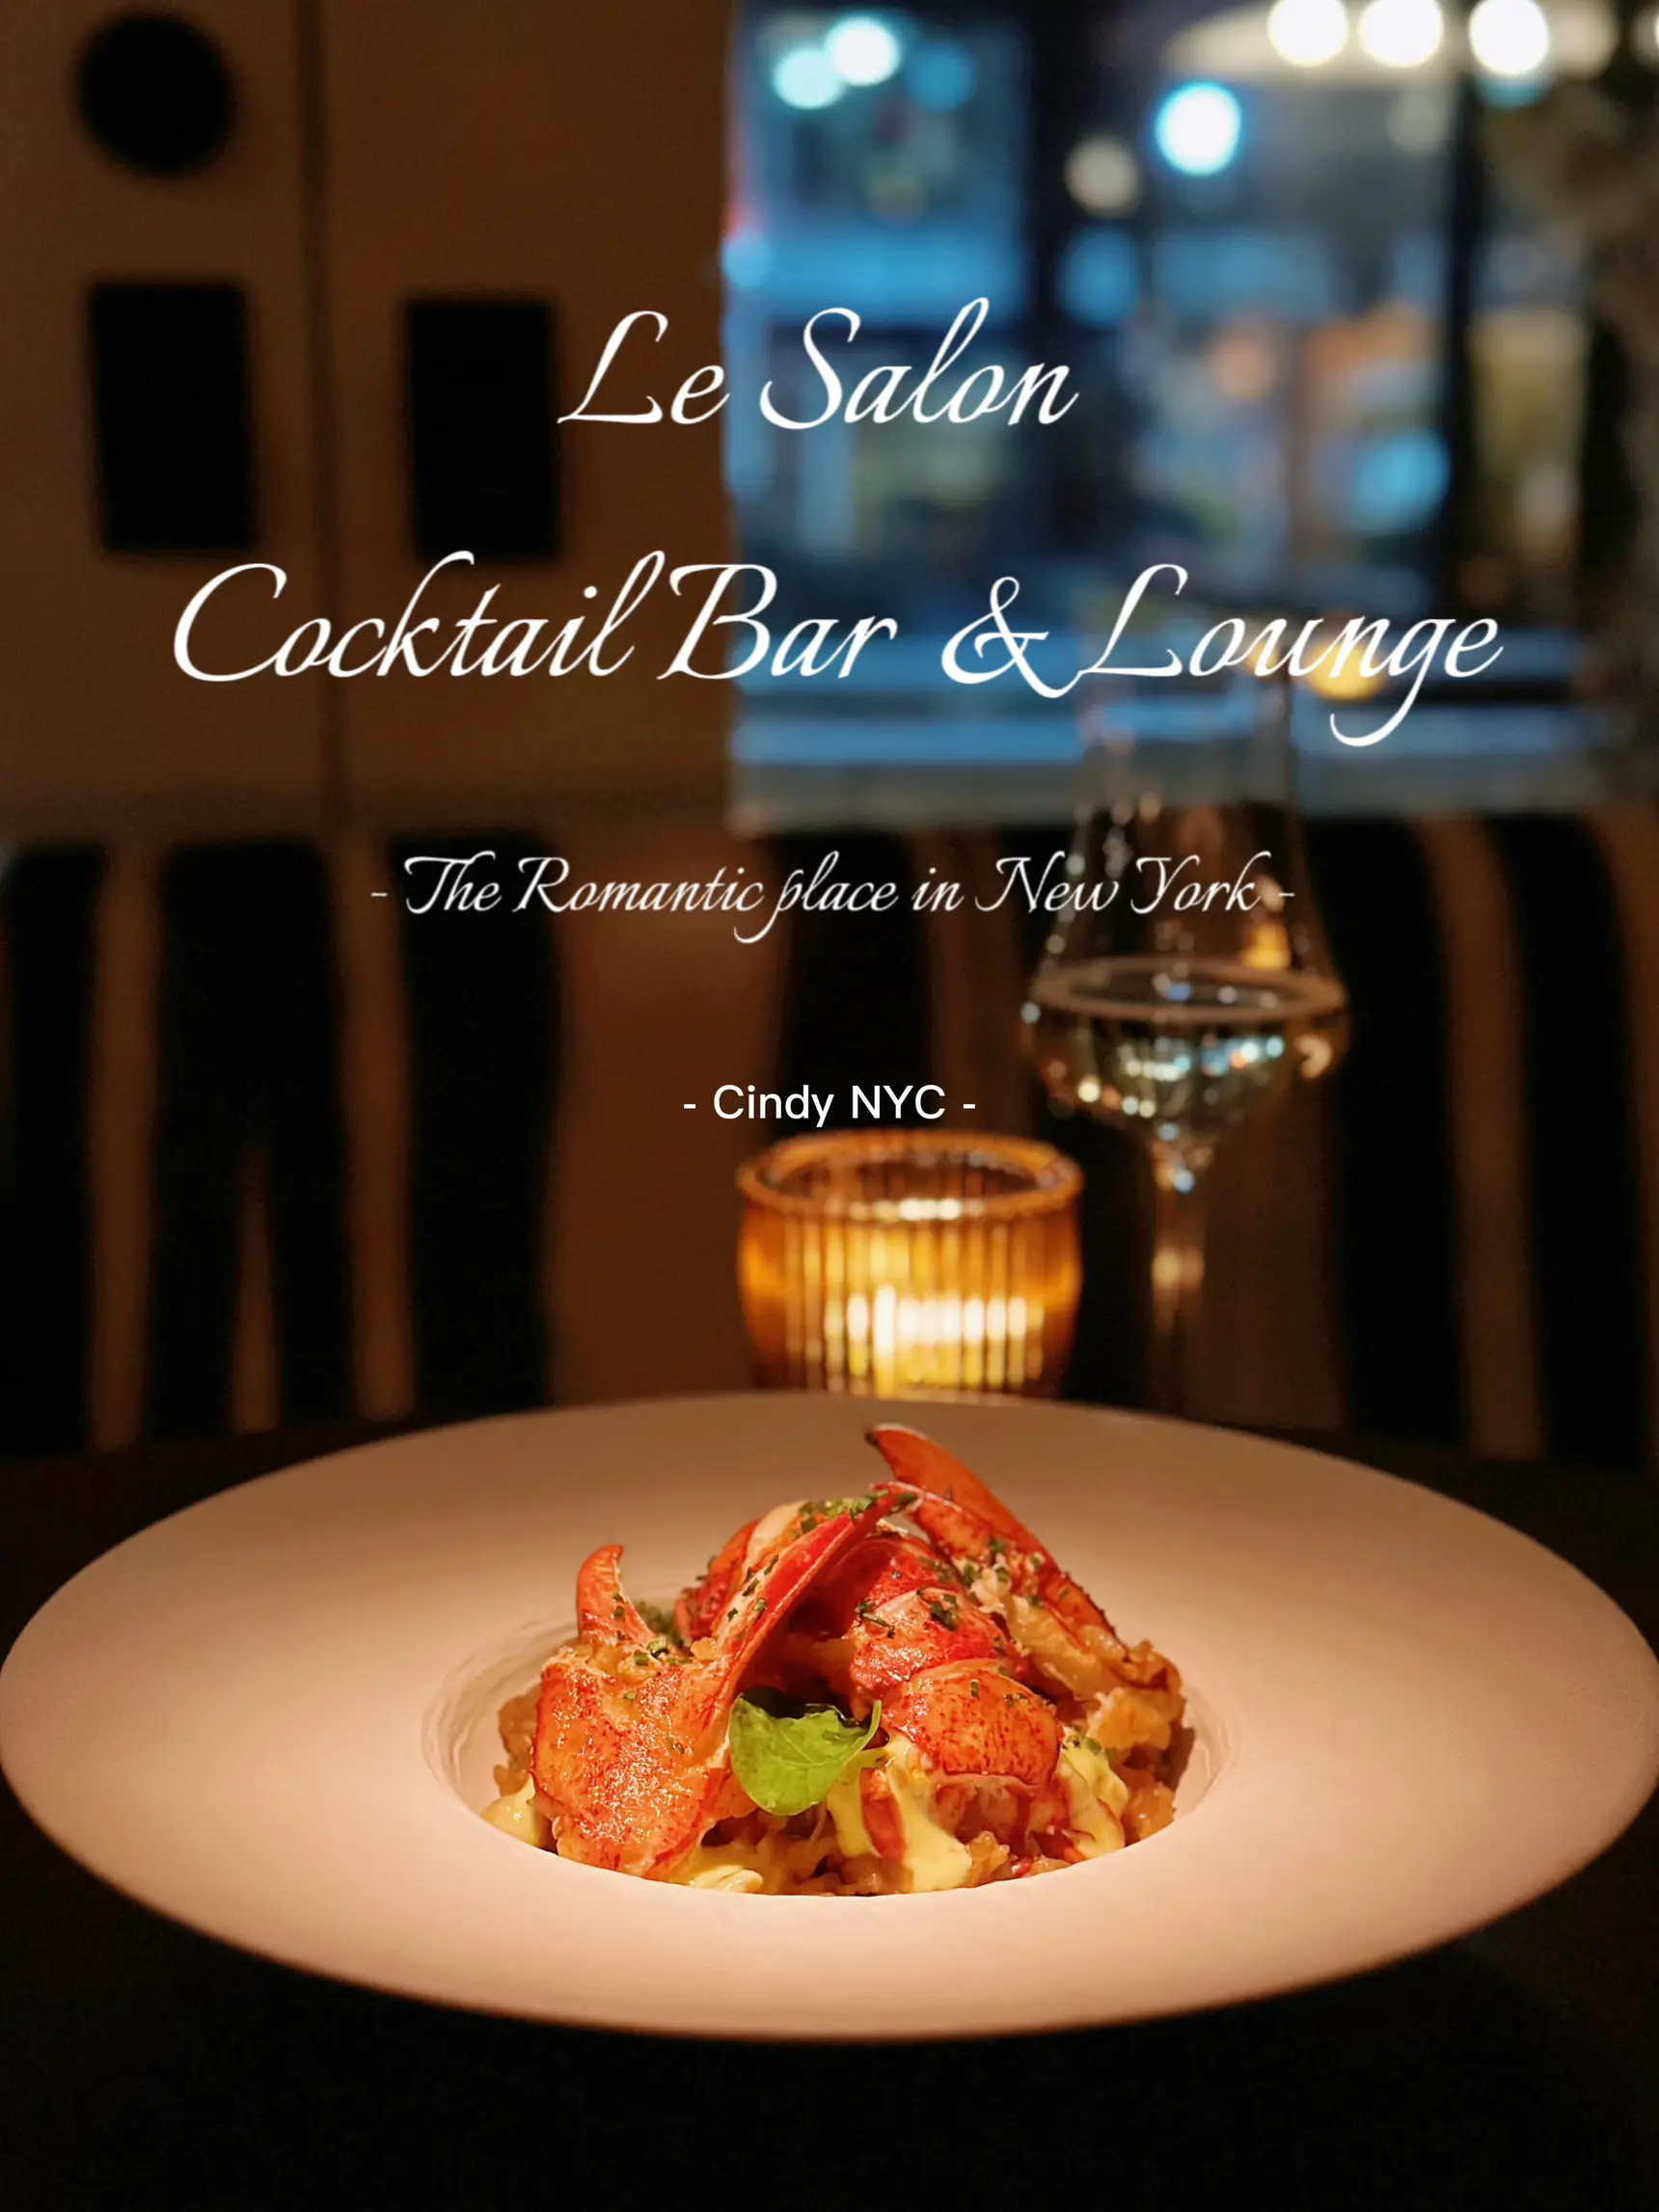 Le Salon Cocktail Bar & Lounge｜Love in New York's images